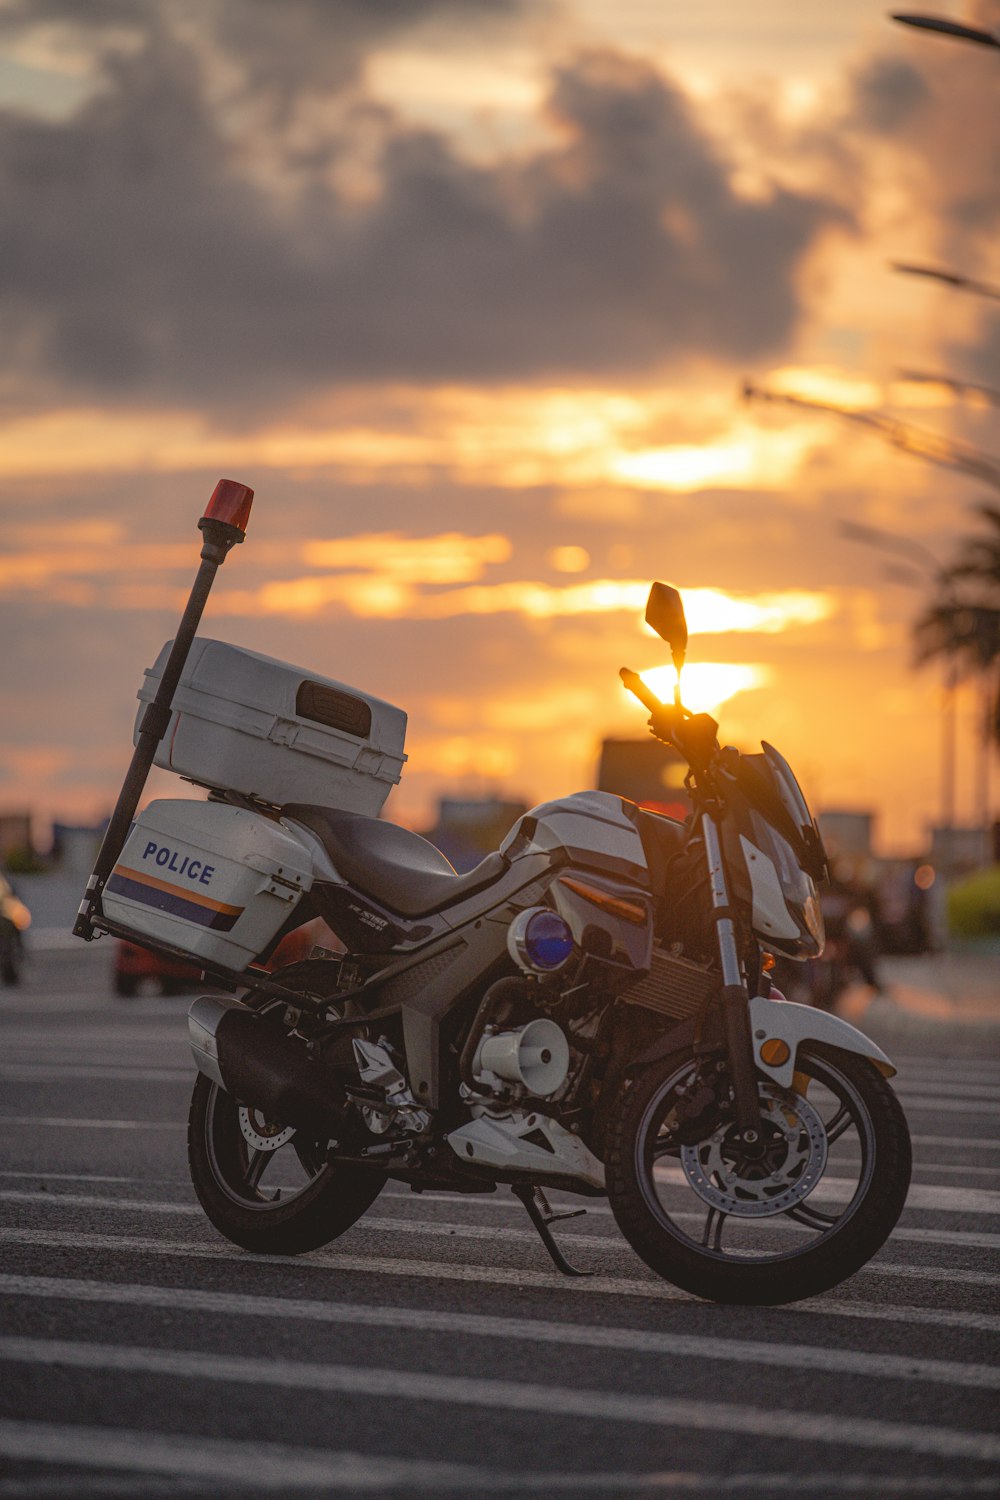 white and black motorcycle on road during sunset